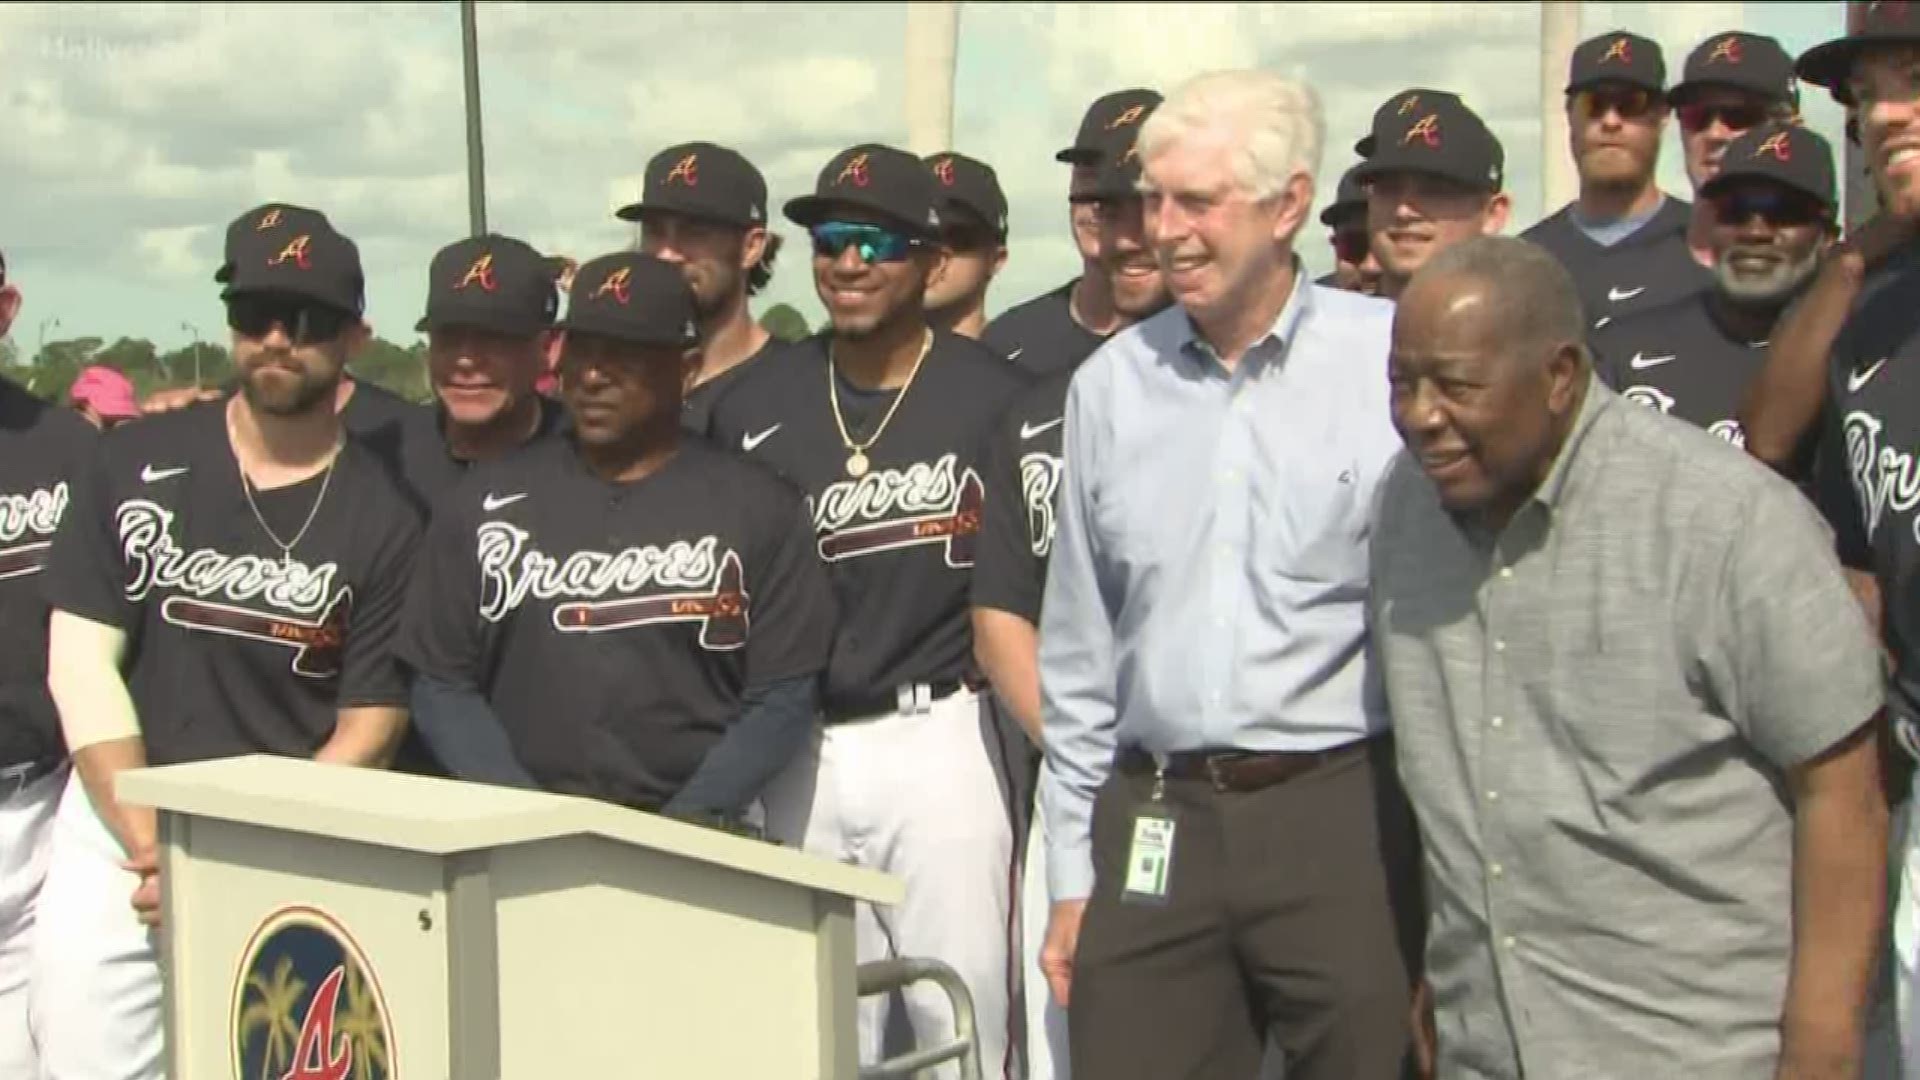 Spring training for the Atlanta Braves has just begun in Florida, and the team took time out to recognize a living legend.